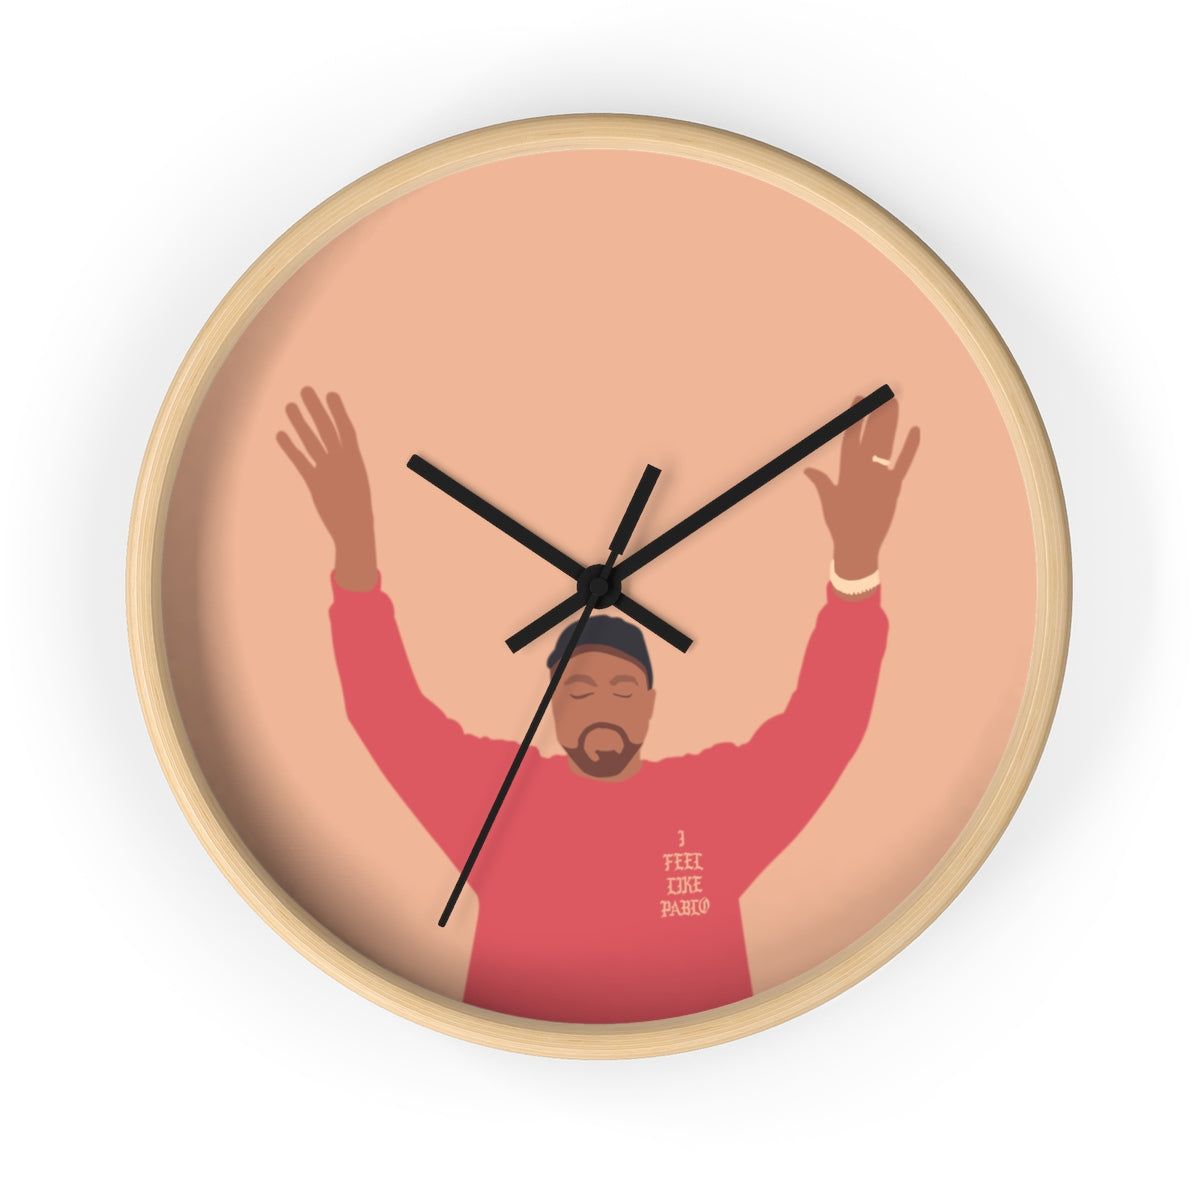 Kanye West I Feel Like Pablo Wall clock - The Life of Pablo TLOP tour merch inspired-10 in-Wooden-Black-Archethype